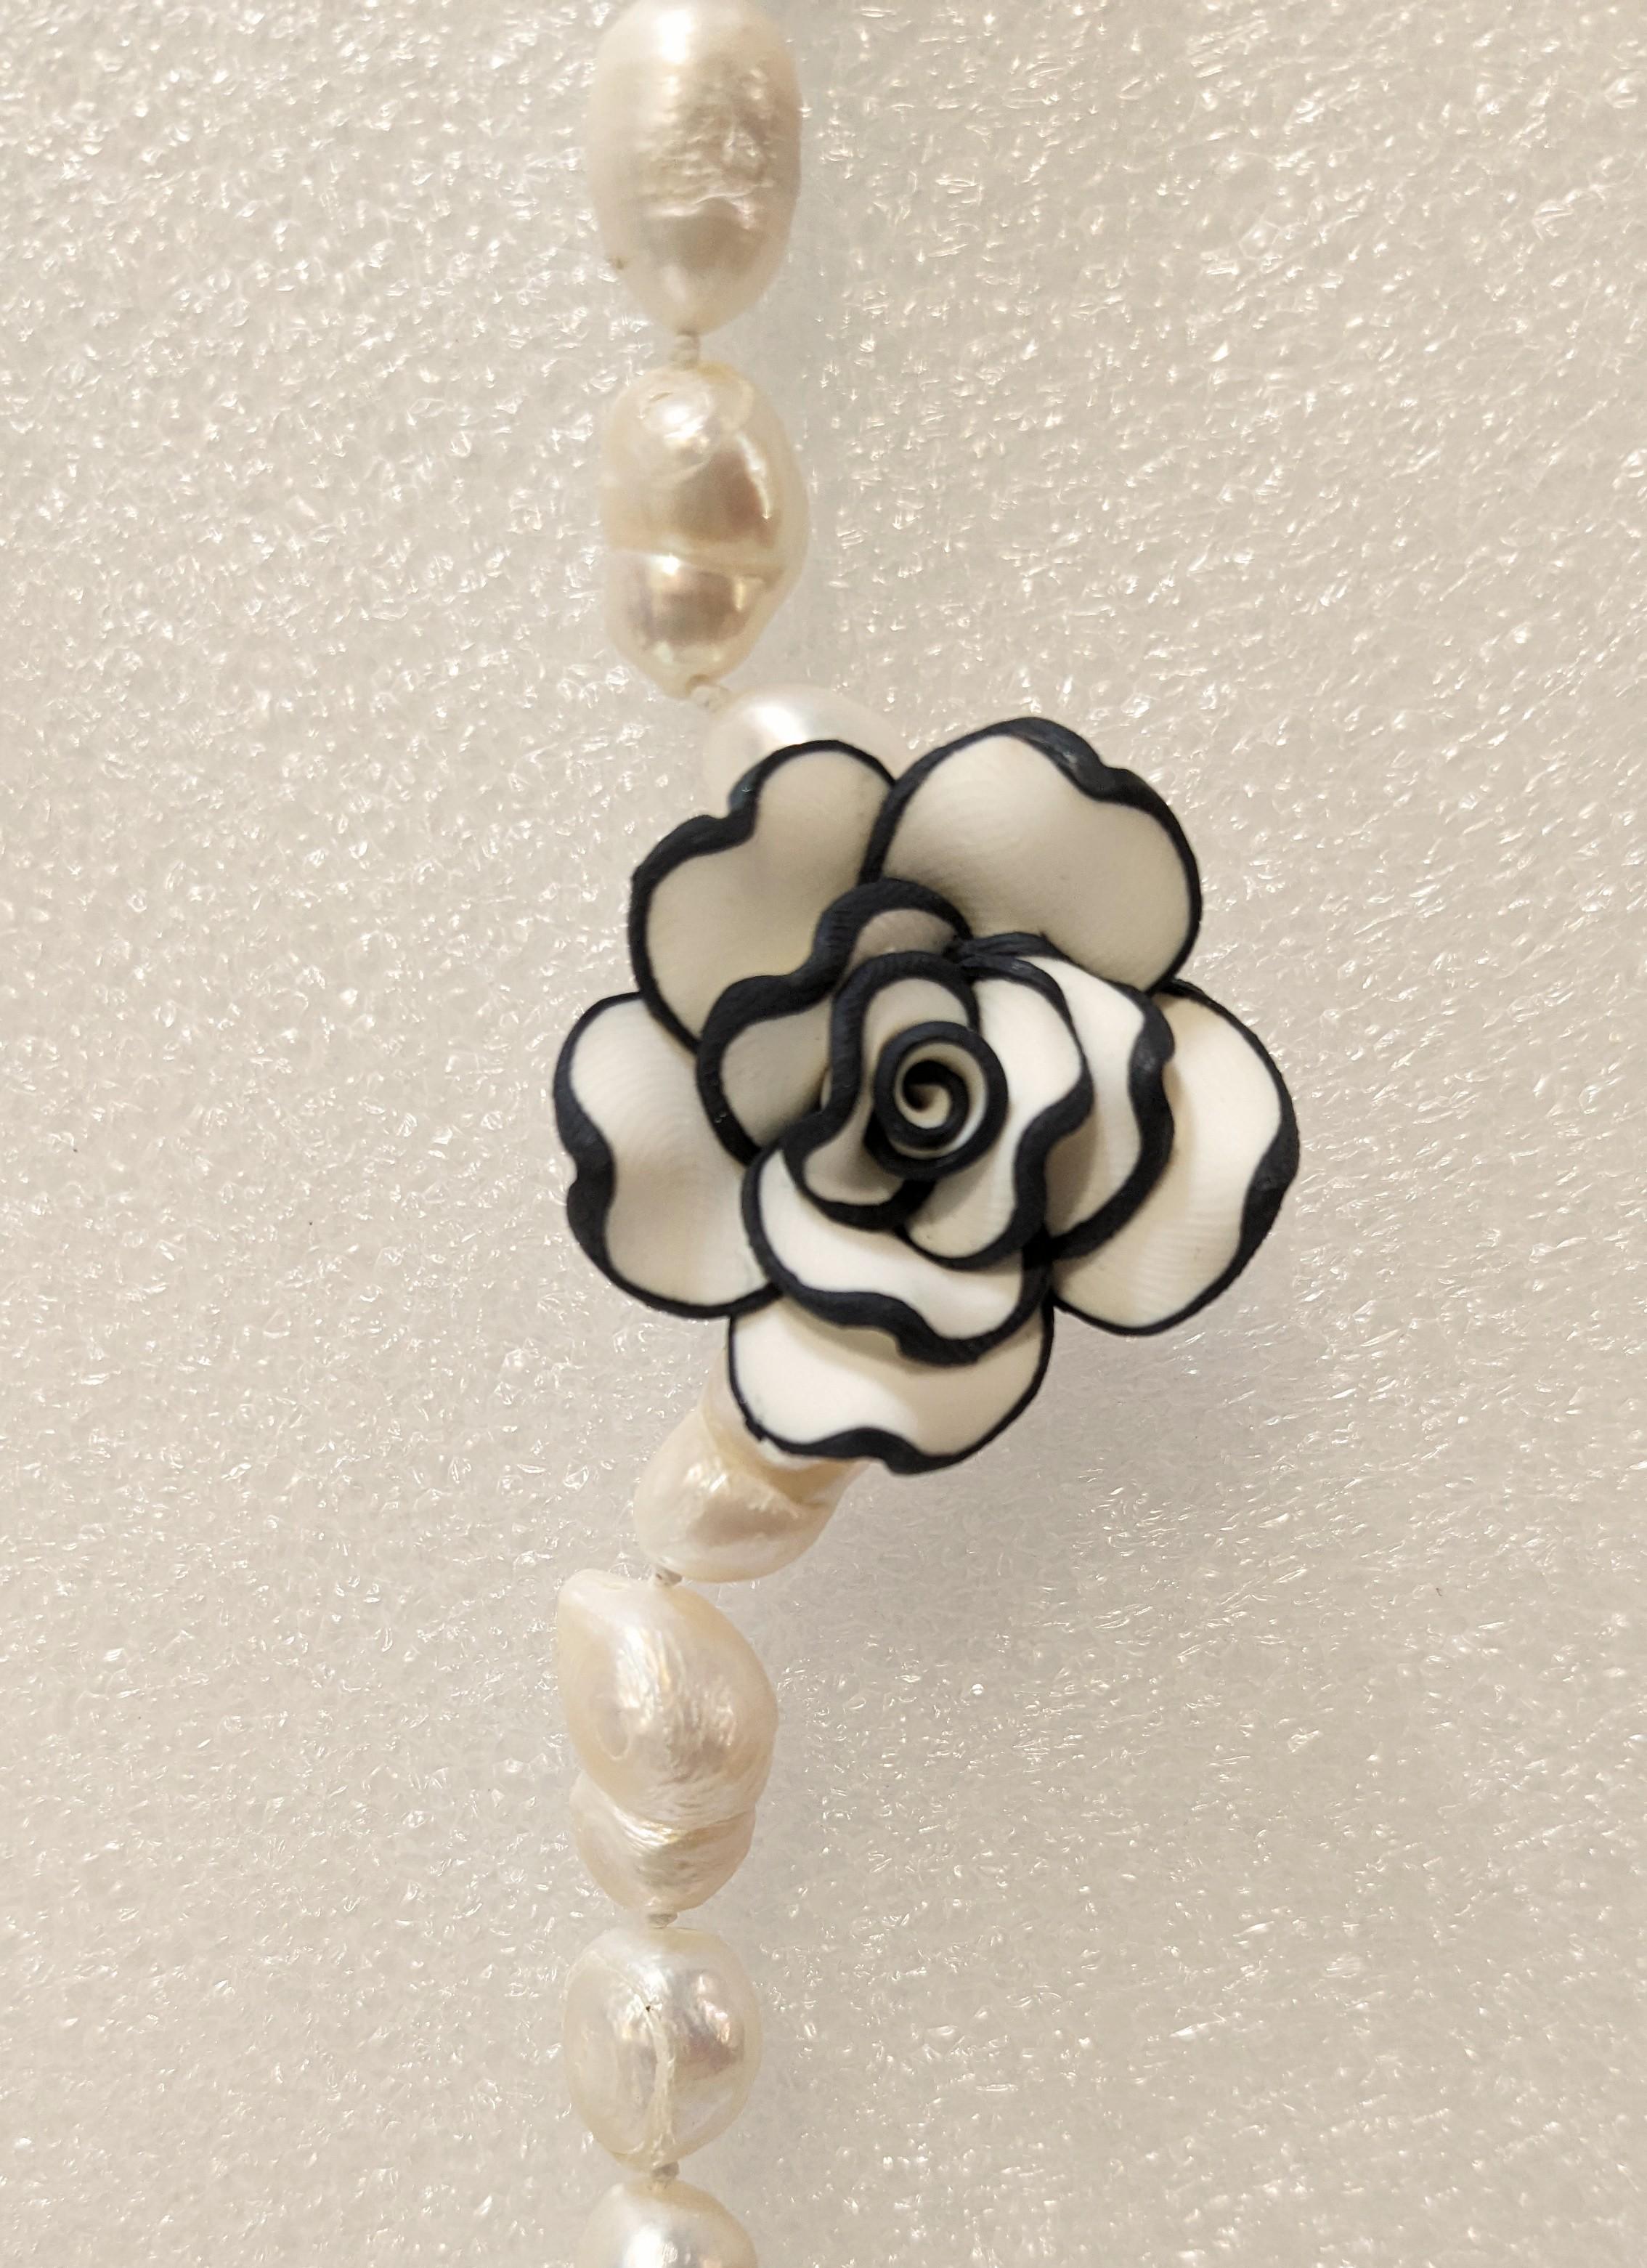 Contemporary  Long River Pearl Necklace with Chanel-type Resin Flowers. For Sale